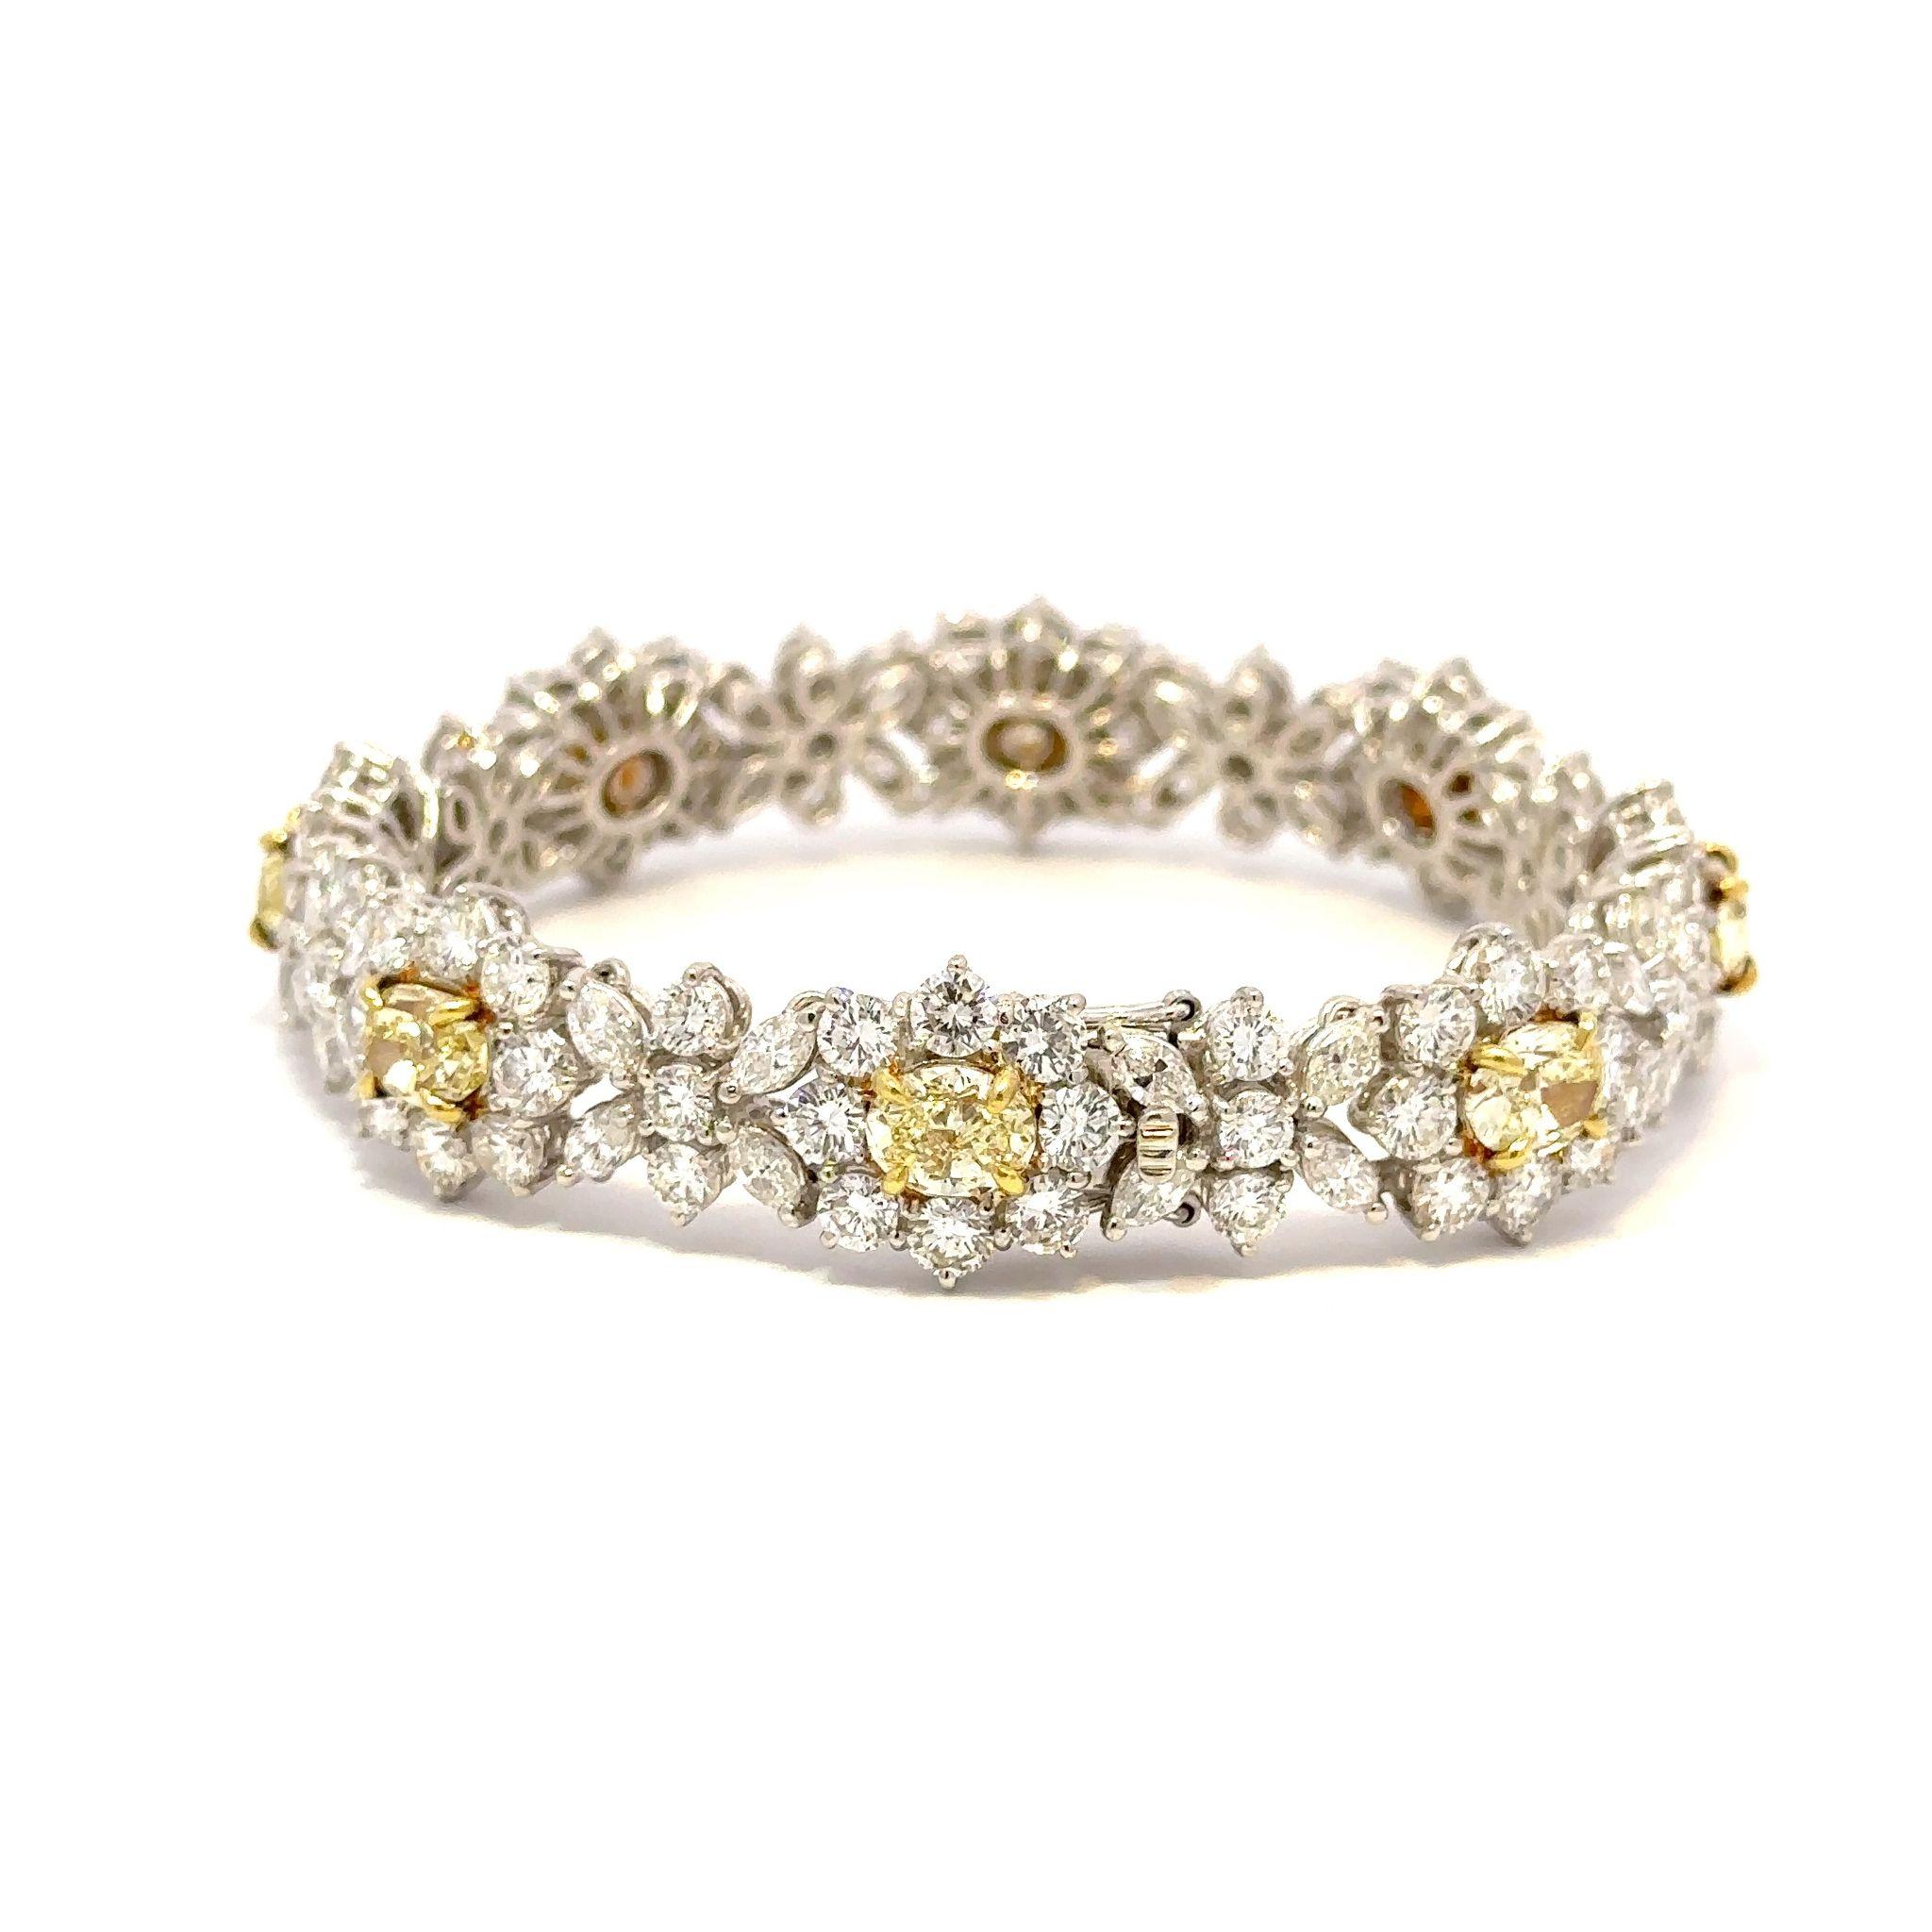 24.89 Ct. Fancy Yellow and White Diamond Bracelet in Platinum In Excellent Condition For Sale In Houston, TX